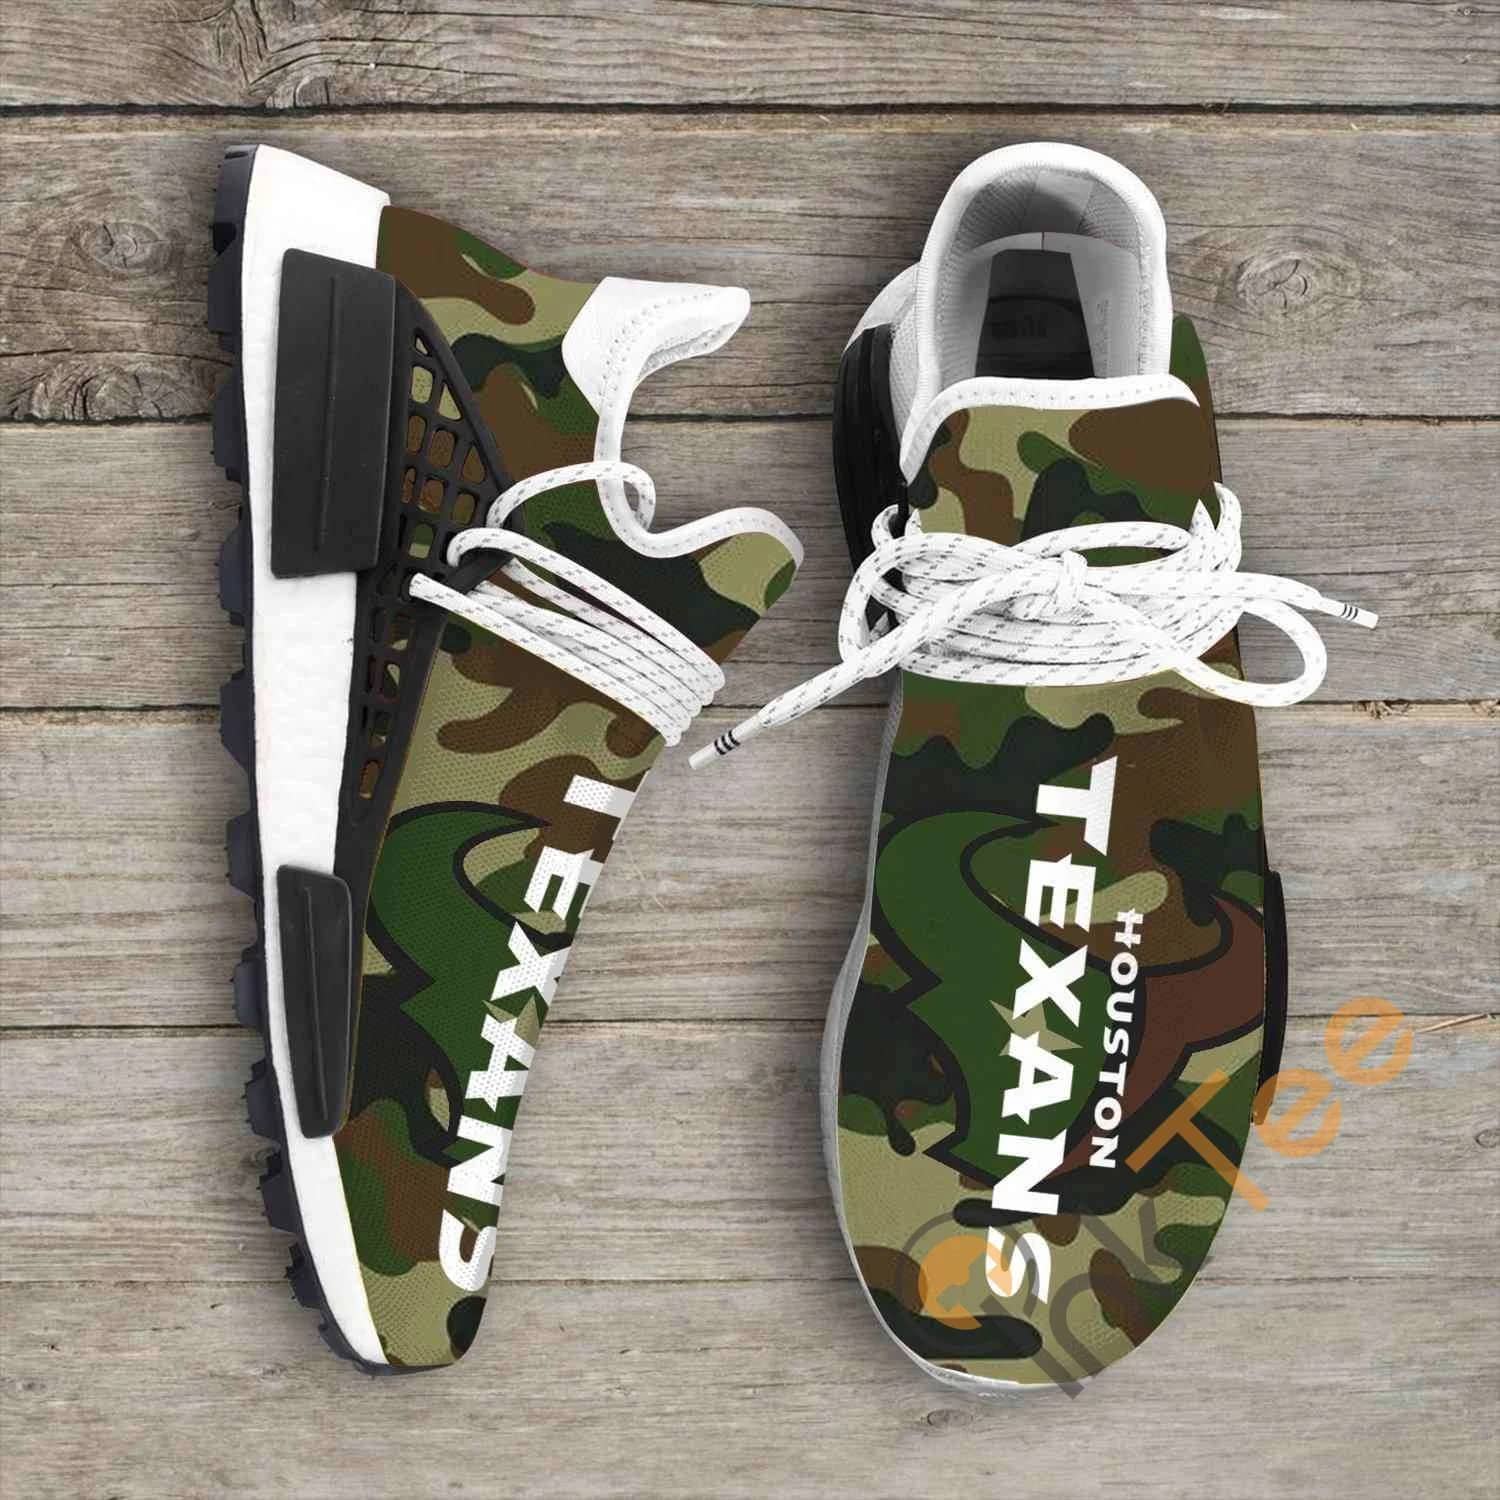 Camo Camouflage Houston Texans Nfl NMD Human Shoes